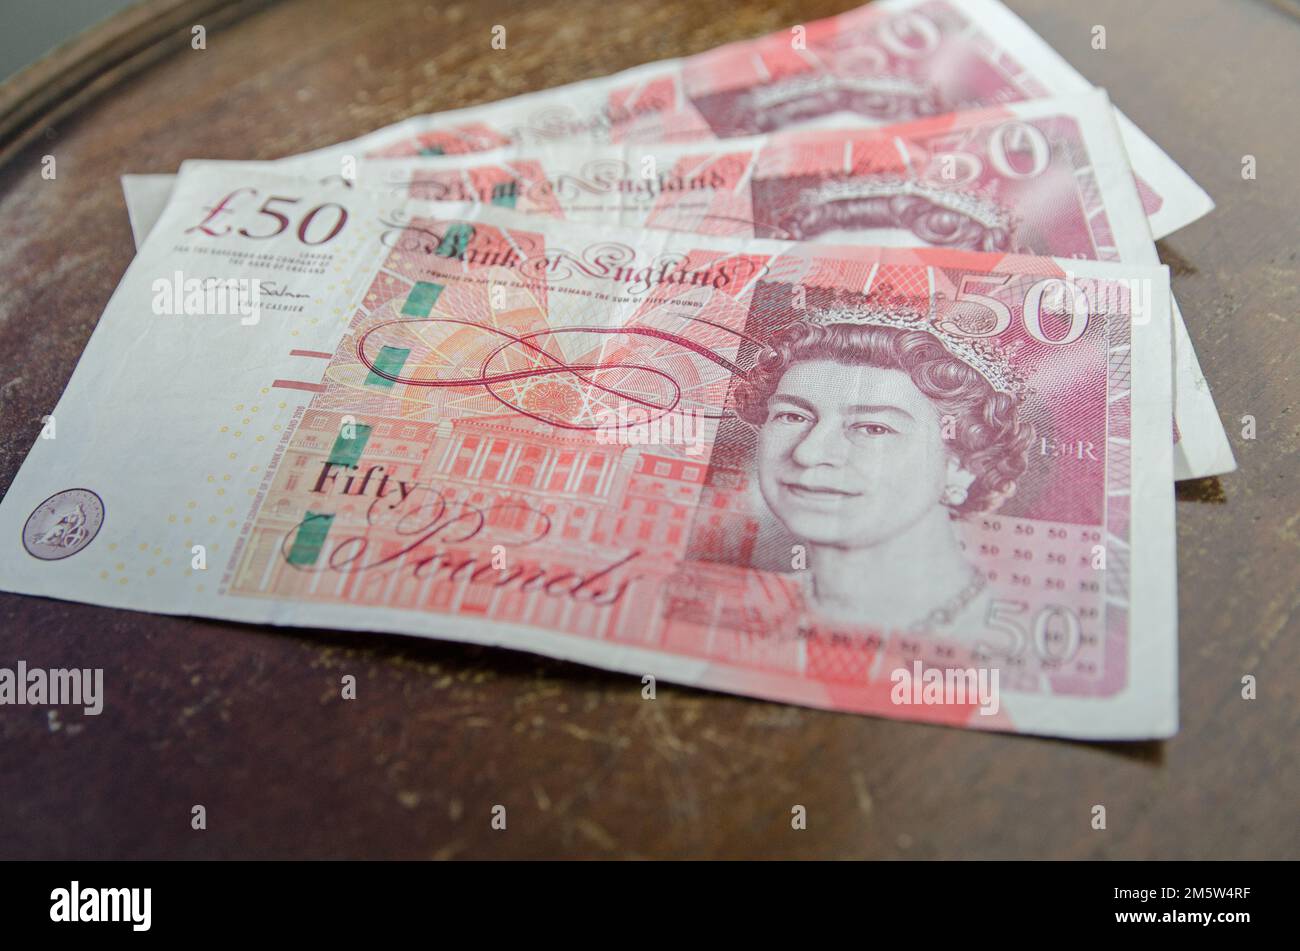 A fan of three £50 banknotes from the Bank of England showing Queen Elizabeth II in a pink and orange print.  Used banknotes, photographed at an angle Stock Photo